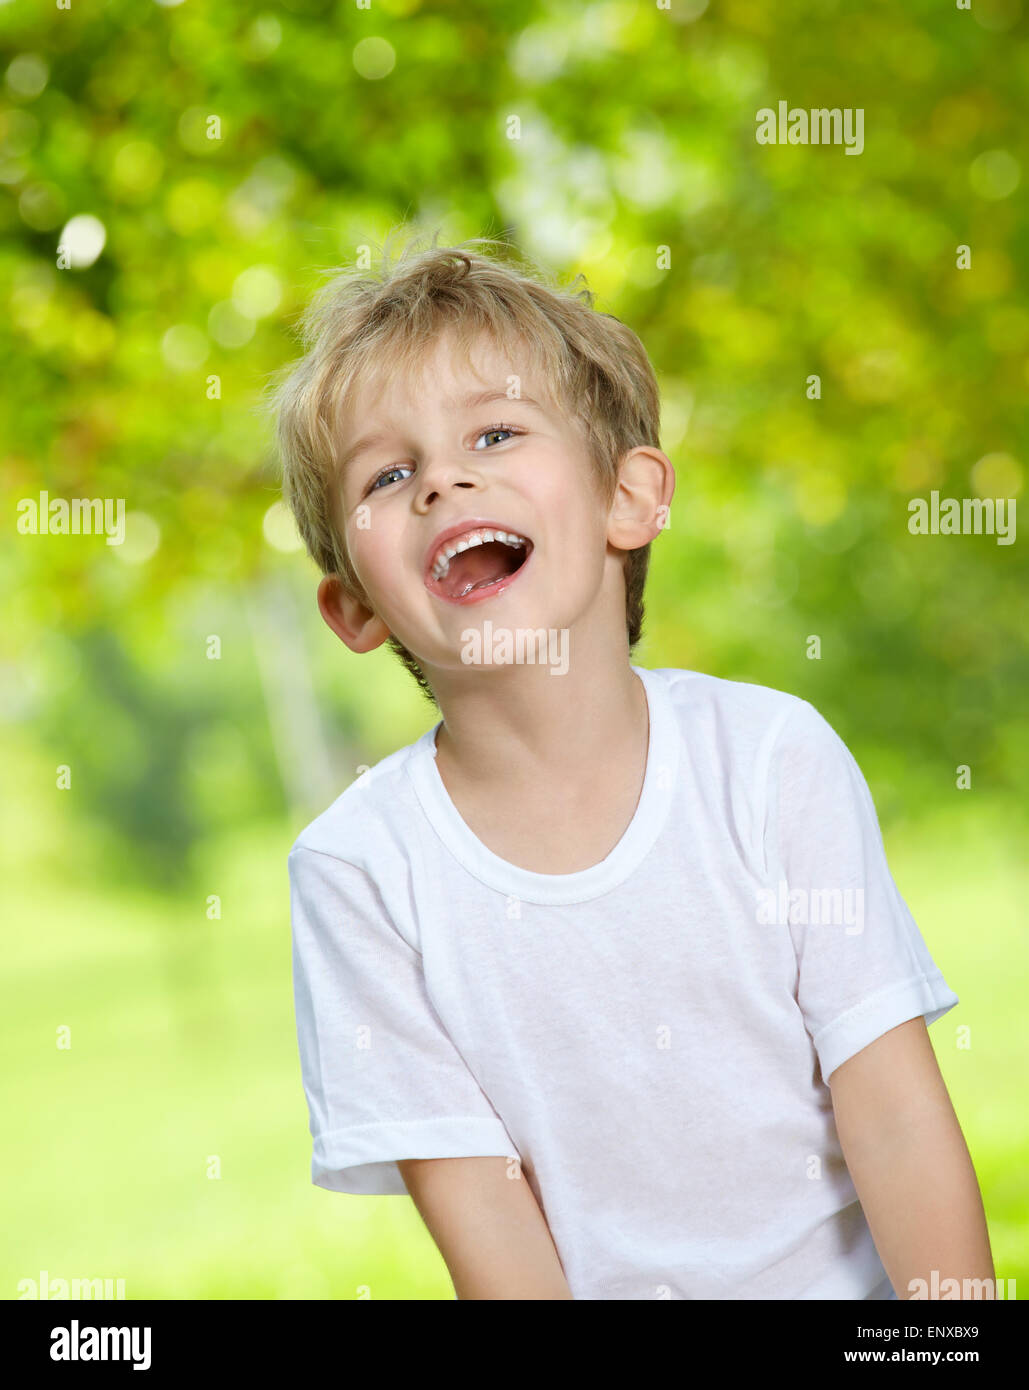 Portrait of the laughing loudly boy against a summer garden Stock Photo